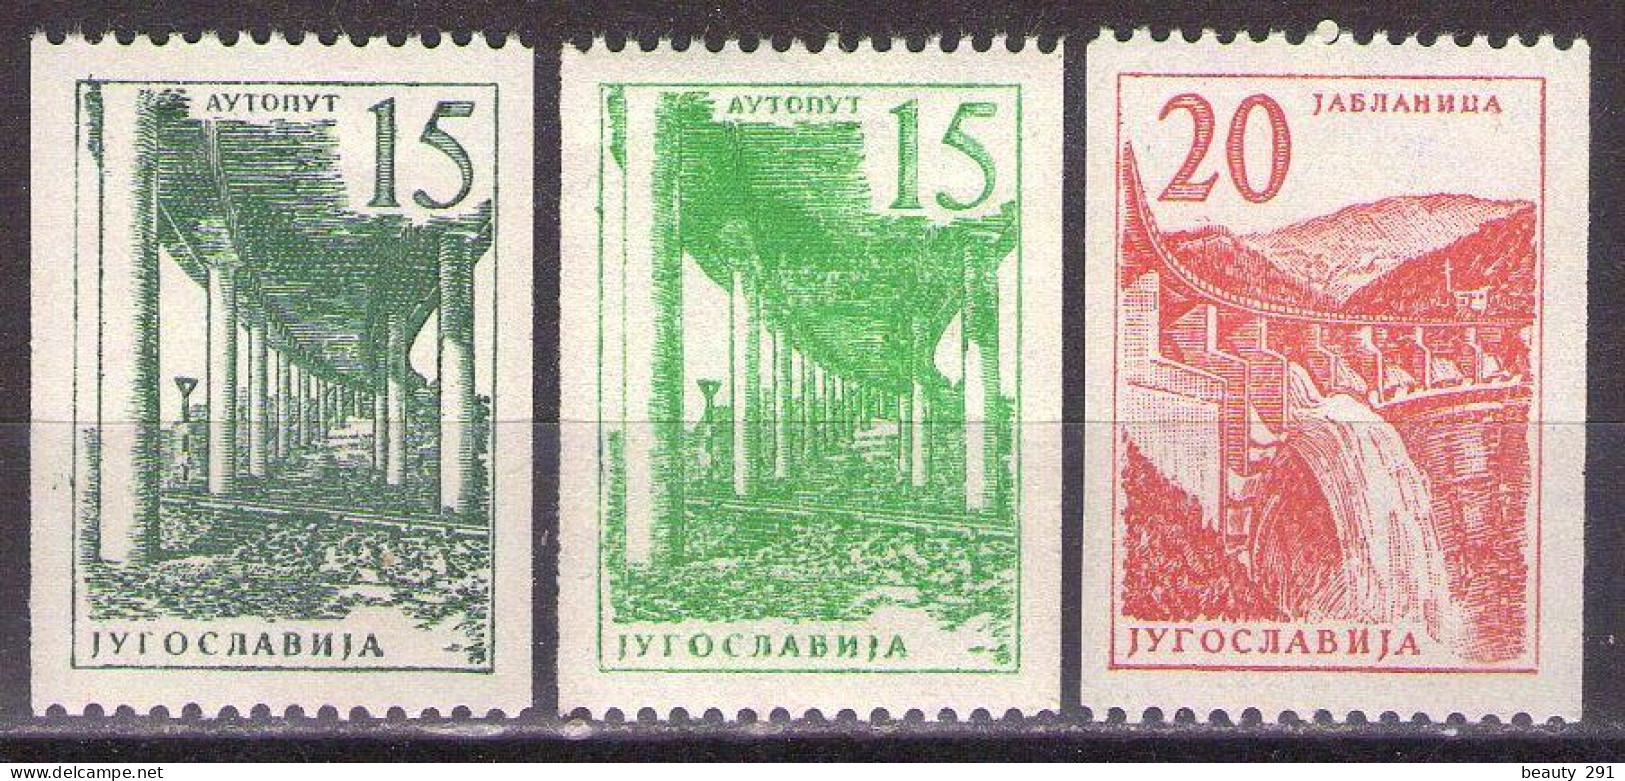 Yugoslavia 1959 - Industry And Architecture Coil Stamps - Mi 898-899a,b - MNH**VF - Nuovi